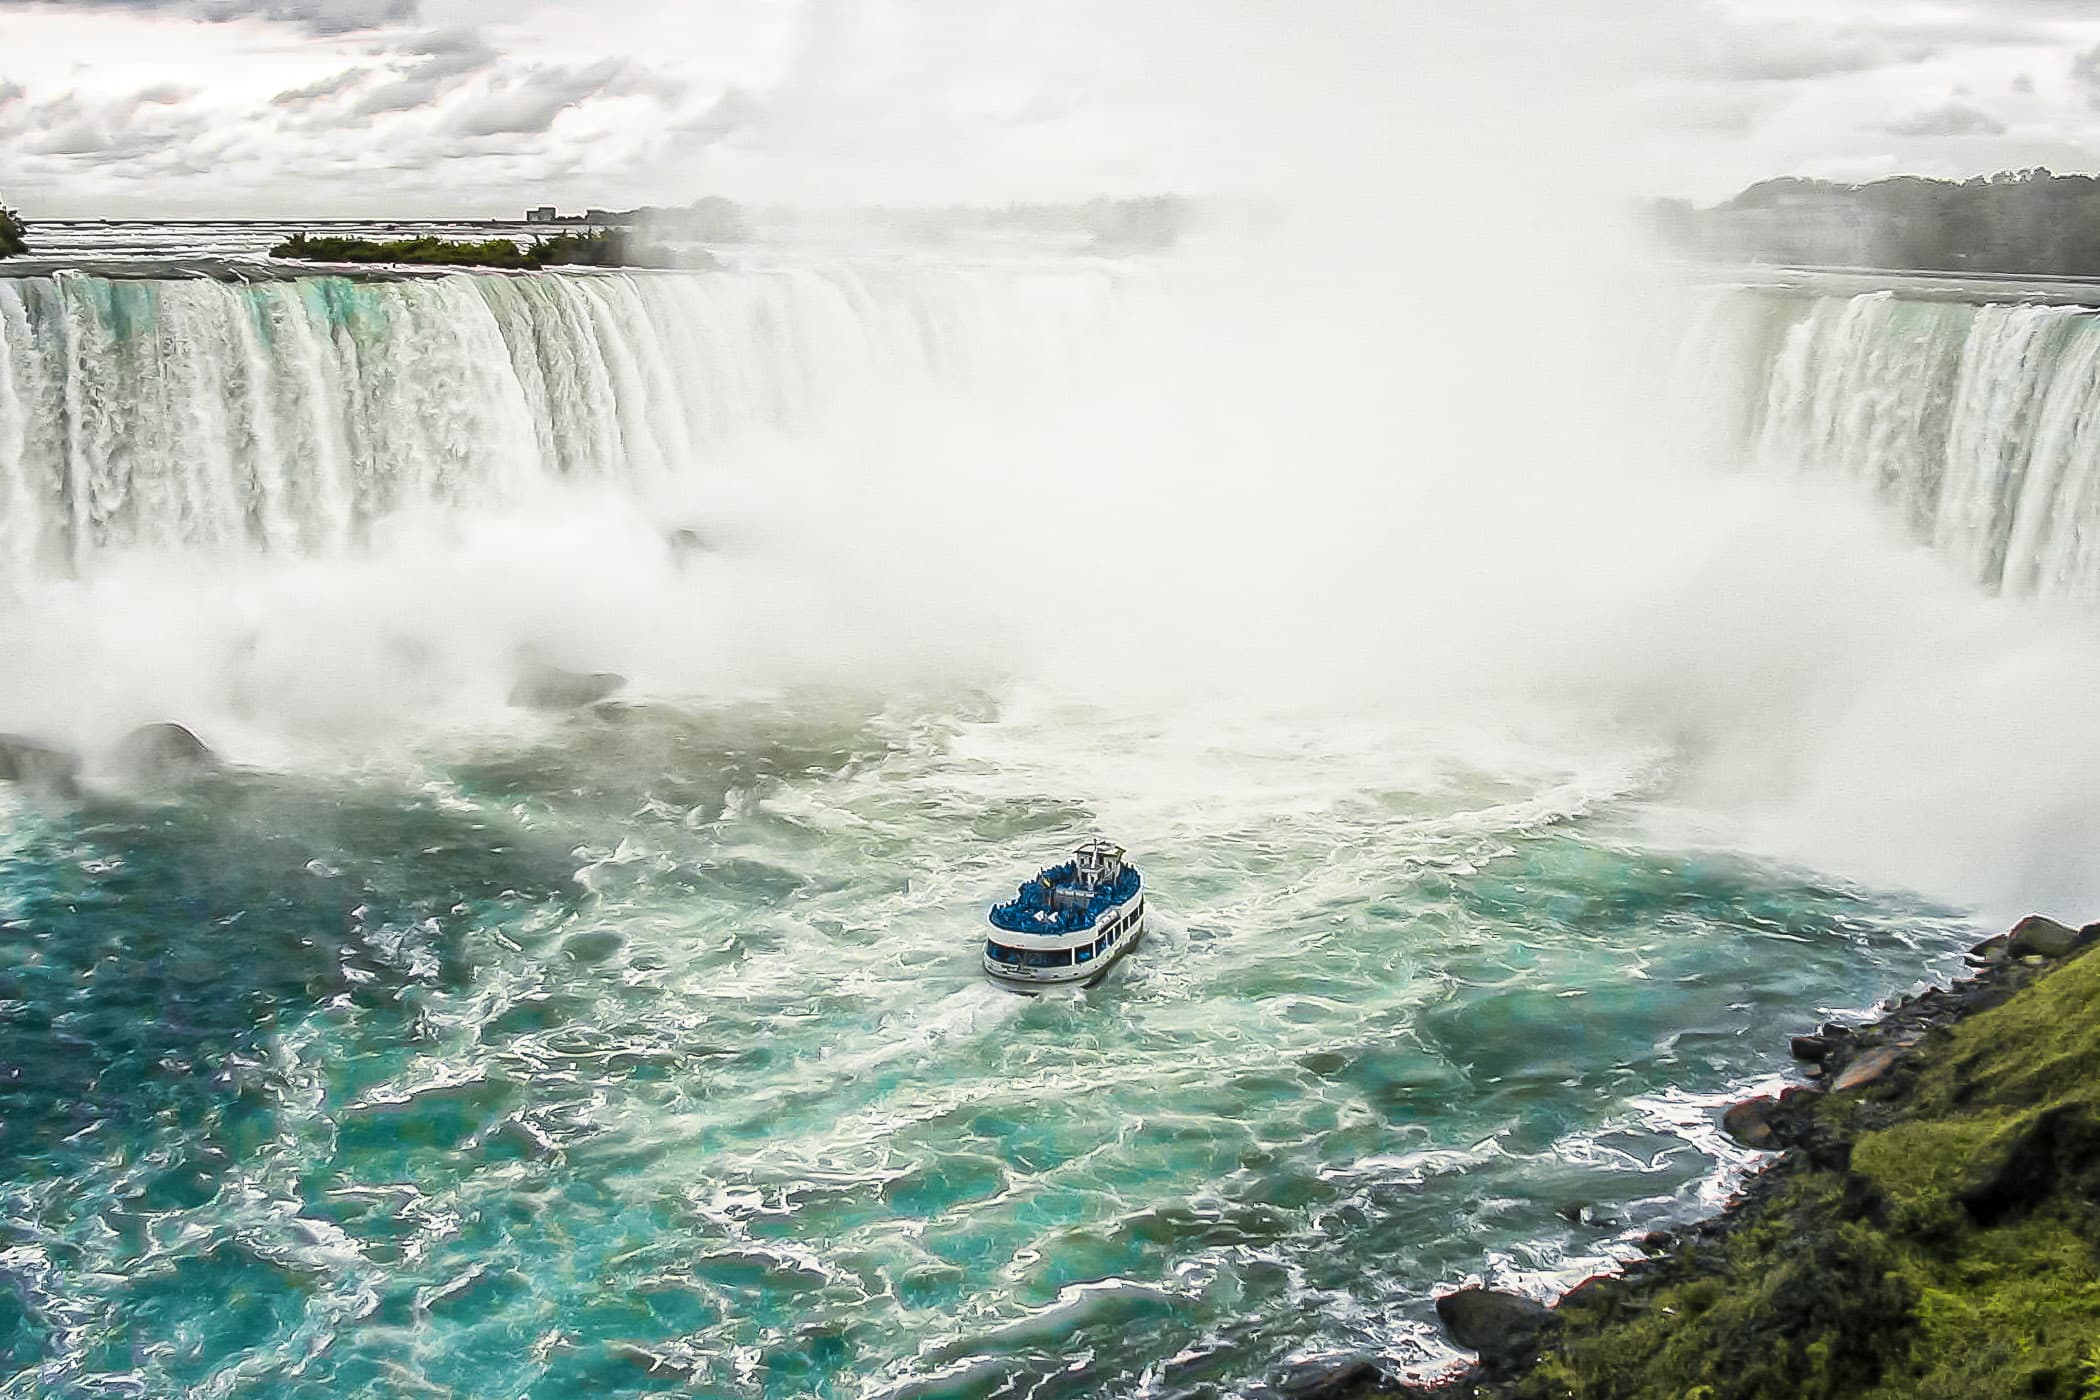 A Maid of The Mist tour boat braves the Canadian (Horseshoe) Falls at Niagara Falls, Ontario.